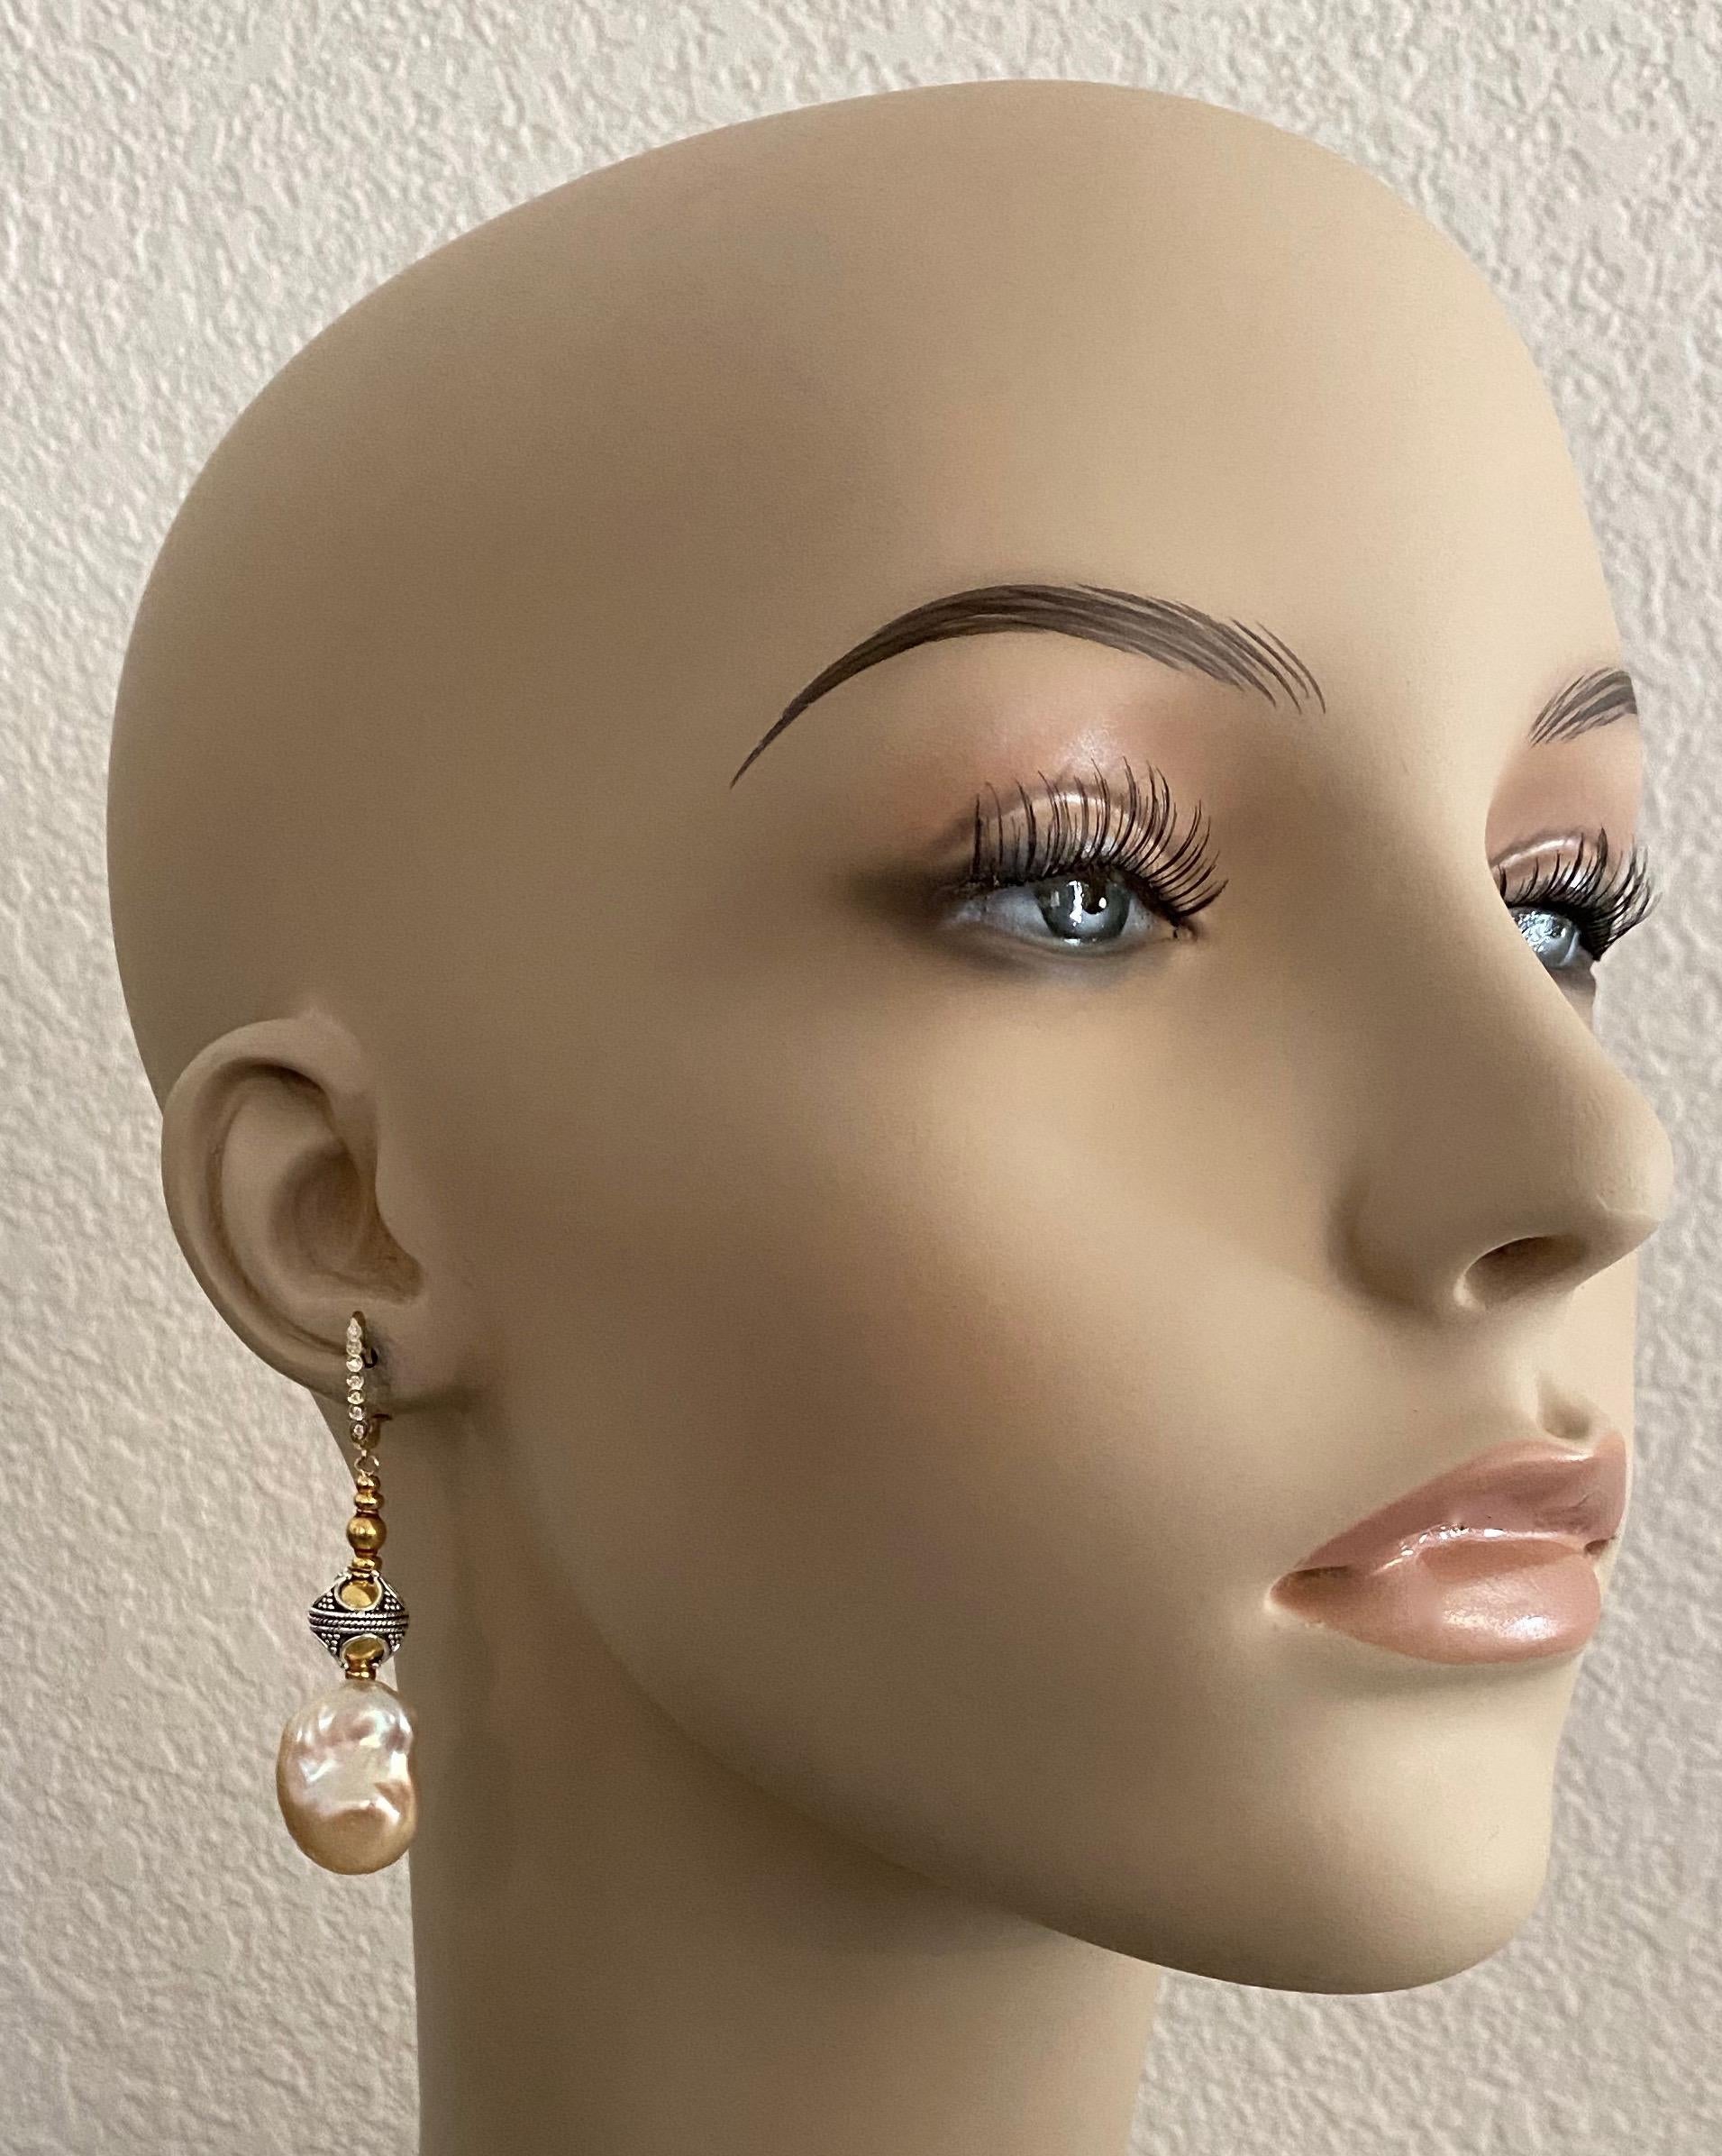 Peach colored baroque freshwater pearls (origin: China) are featured in these elegant dangle earrings.  The pearls measure 21mm x 13mm, are blemish free and possess wonderful luster.  The earrings are further decorated with 18k gold and silver and